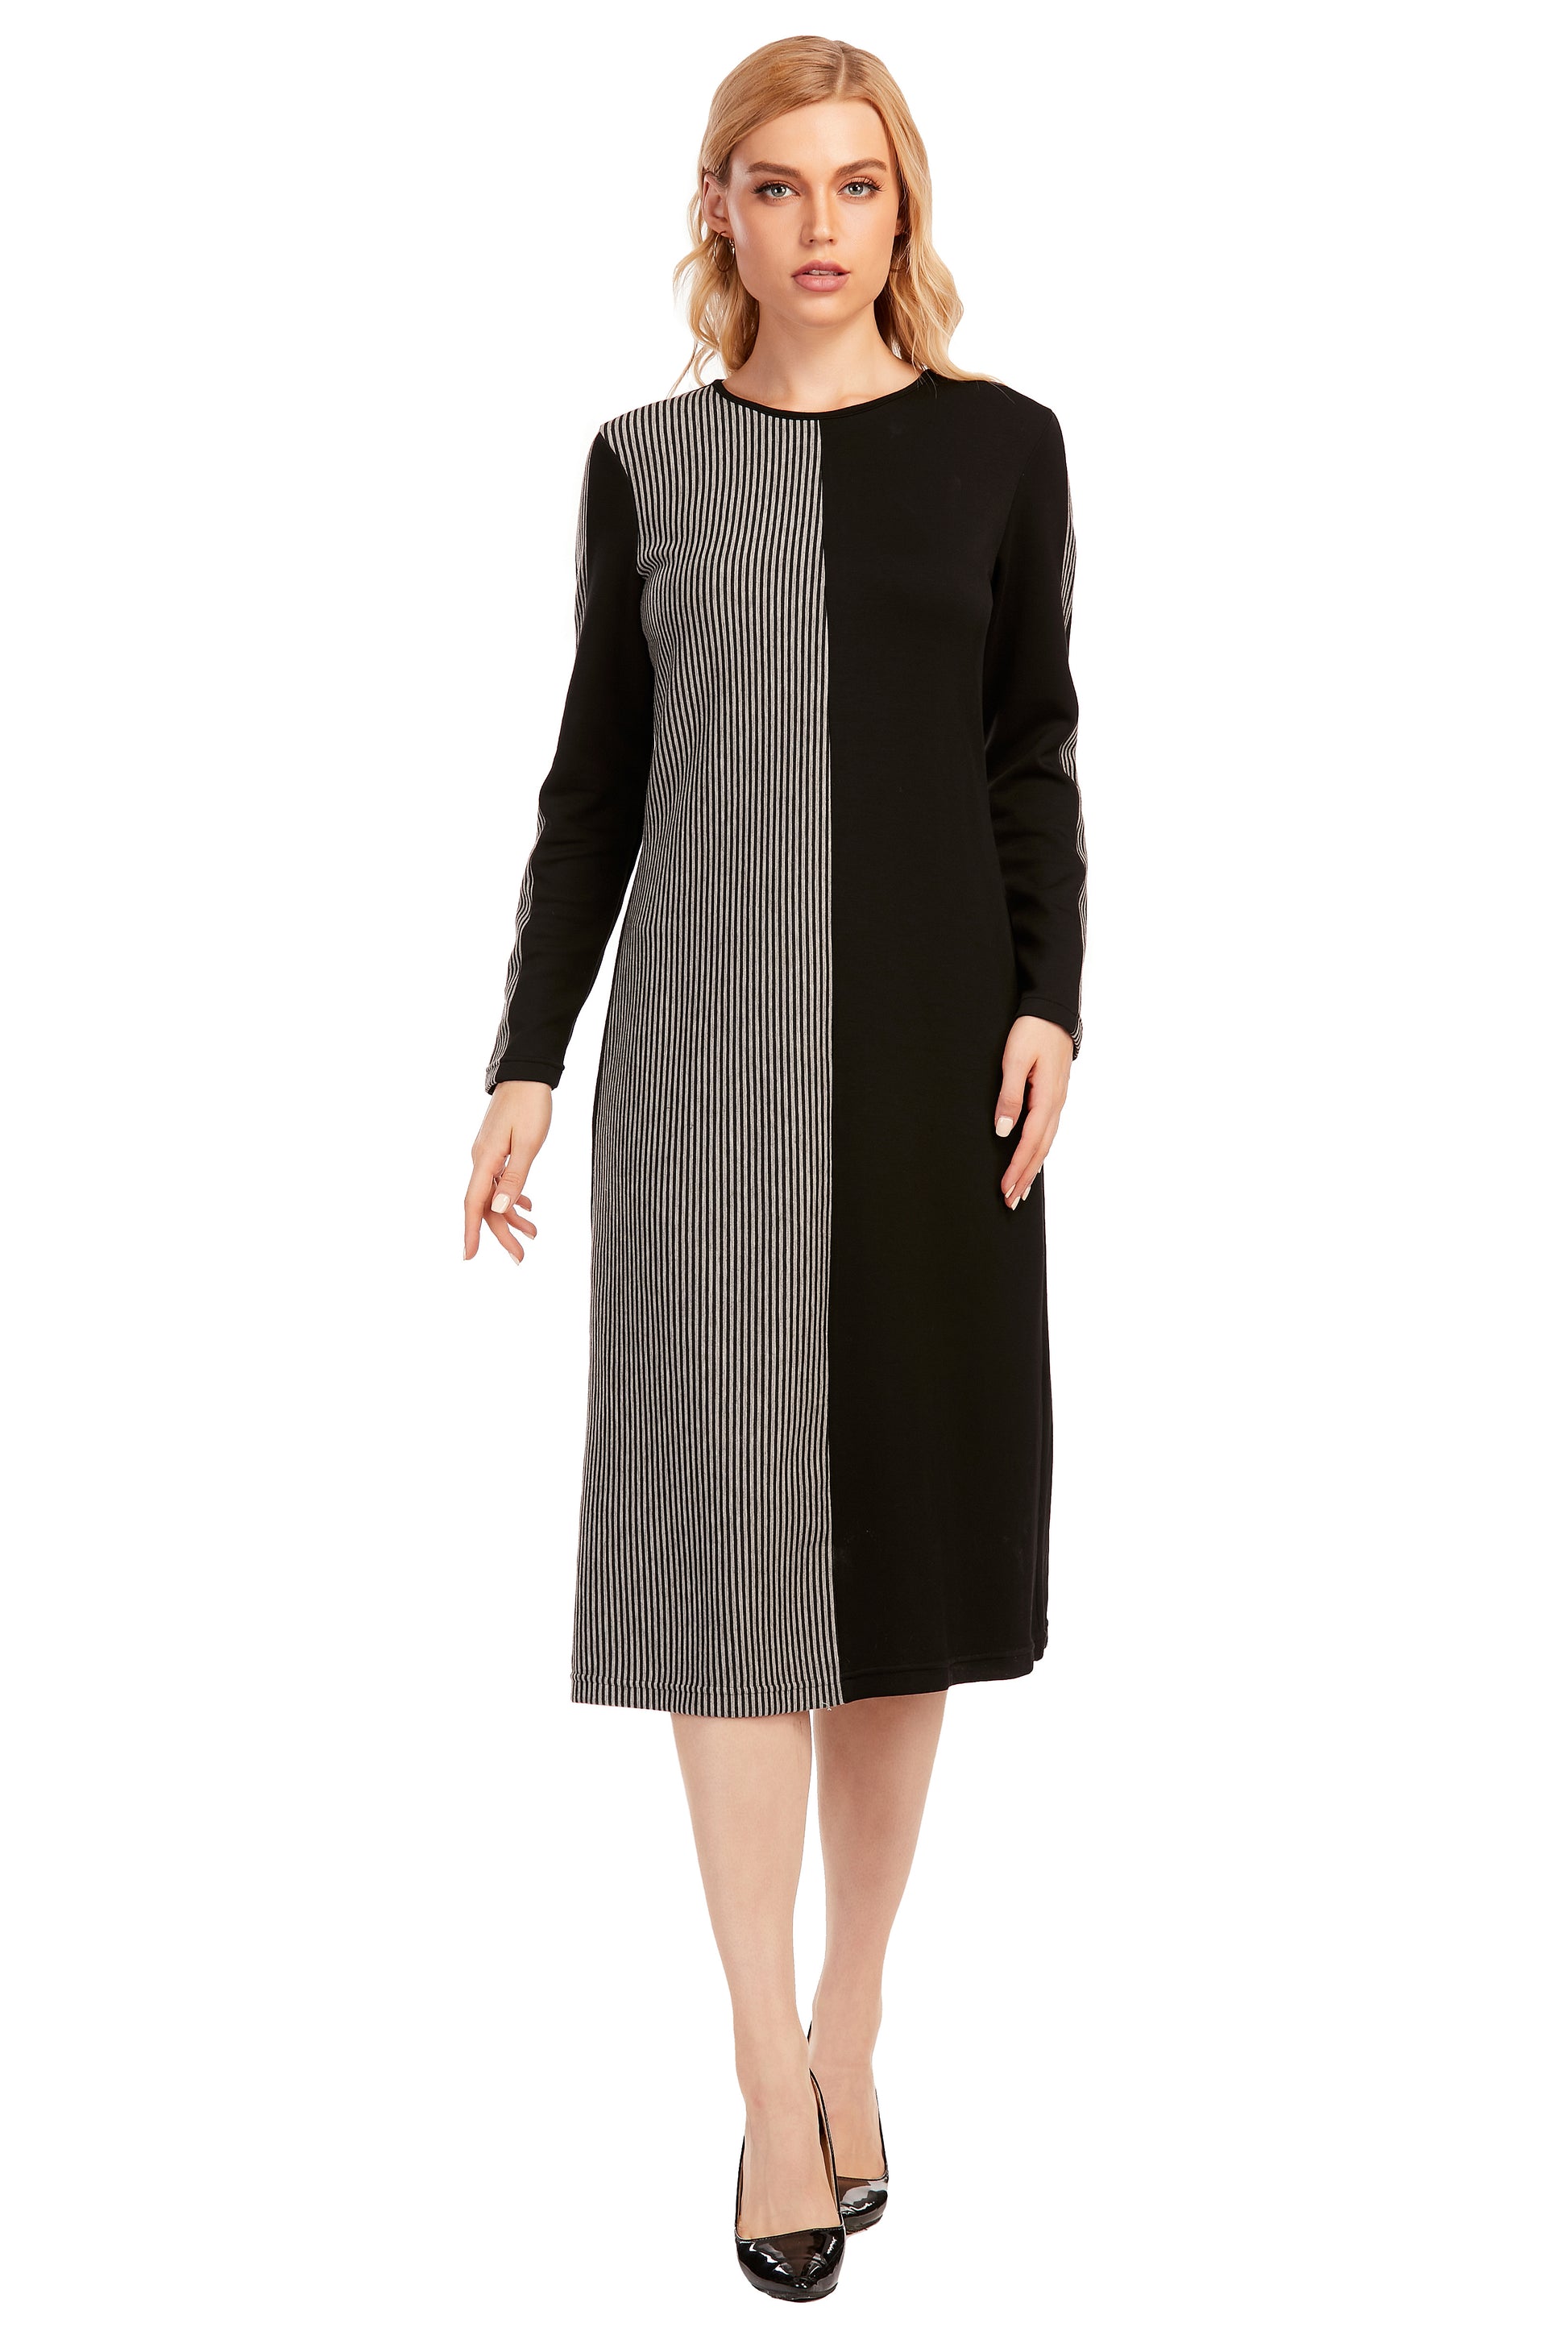 Striped & Solid Modest Knitted Long Sleeve Dress - MissFinchNYC